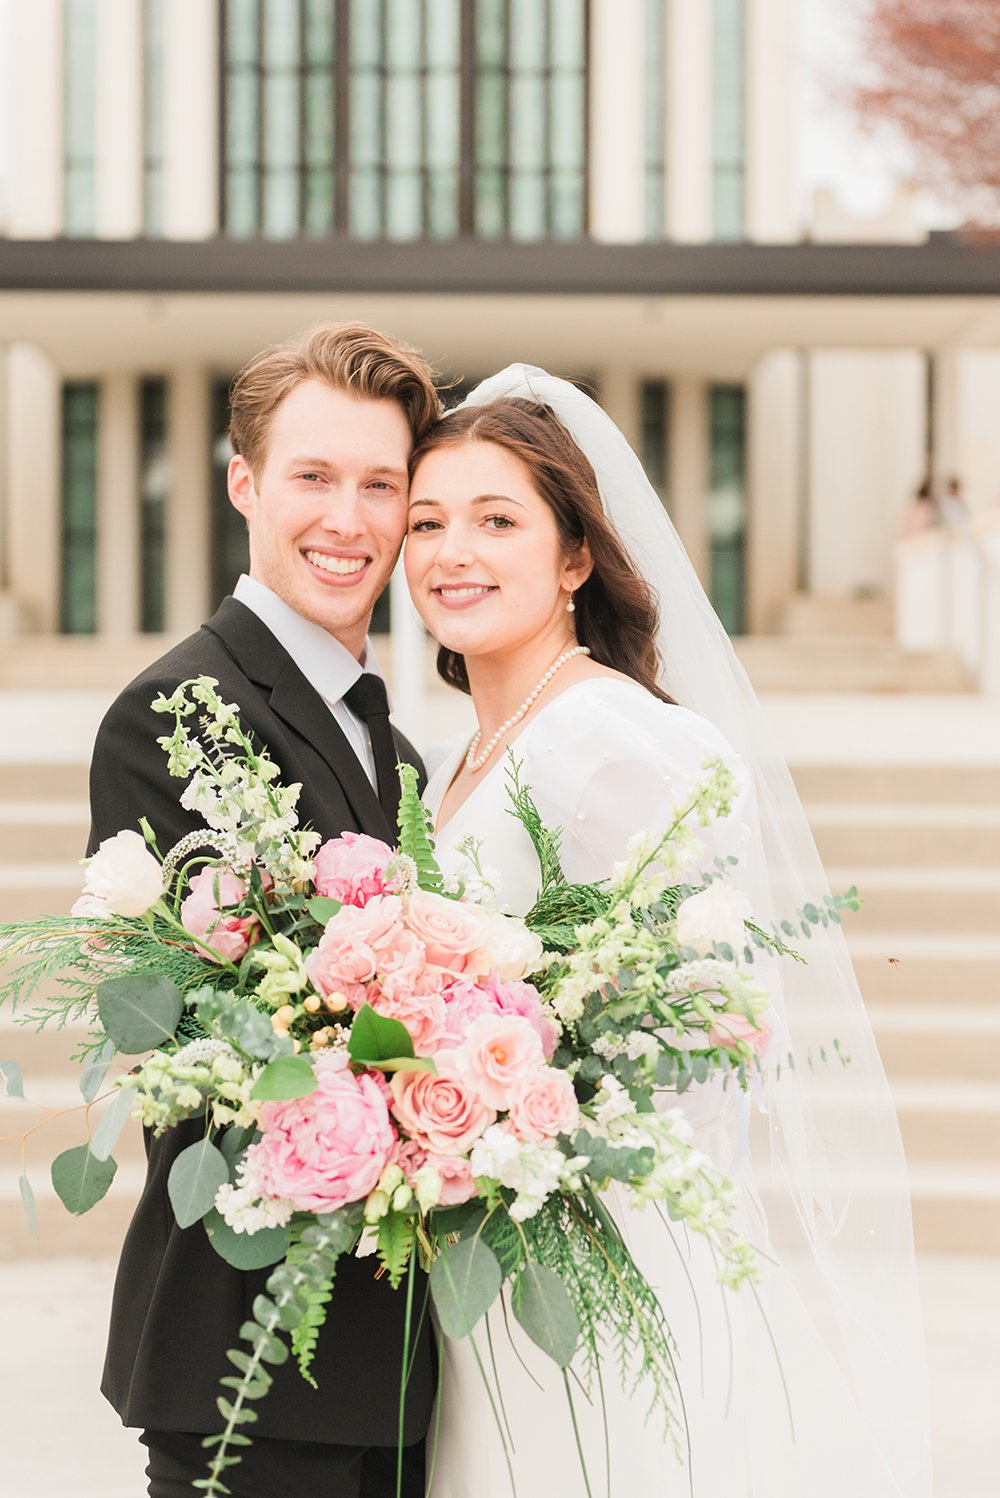  A bride holding a large bouquet of pink and white flowers, and her groom smile together in front of the Atlanta, Georgia LDS temple Professional wedding photographer #peachtreecity #weddingphotographer #ldsweddings #atlantatemple #jacquieerickson 